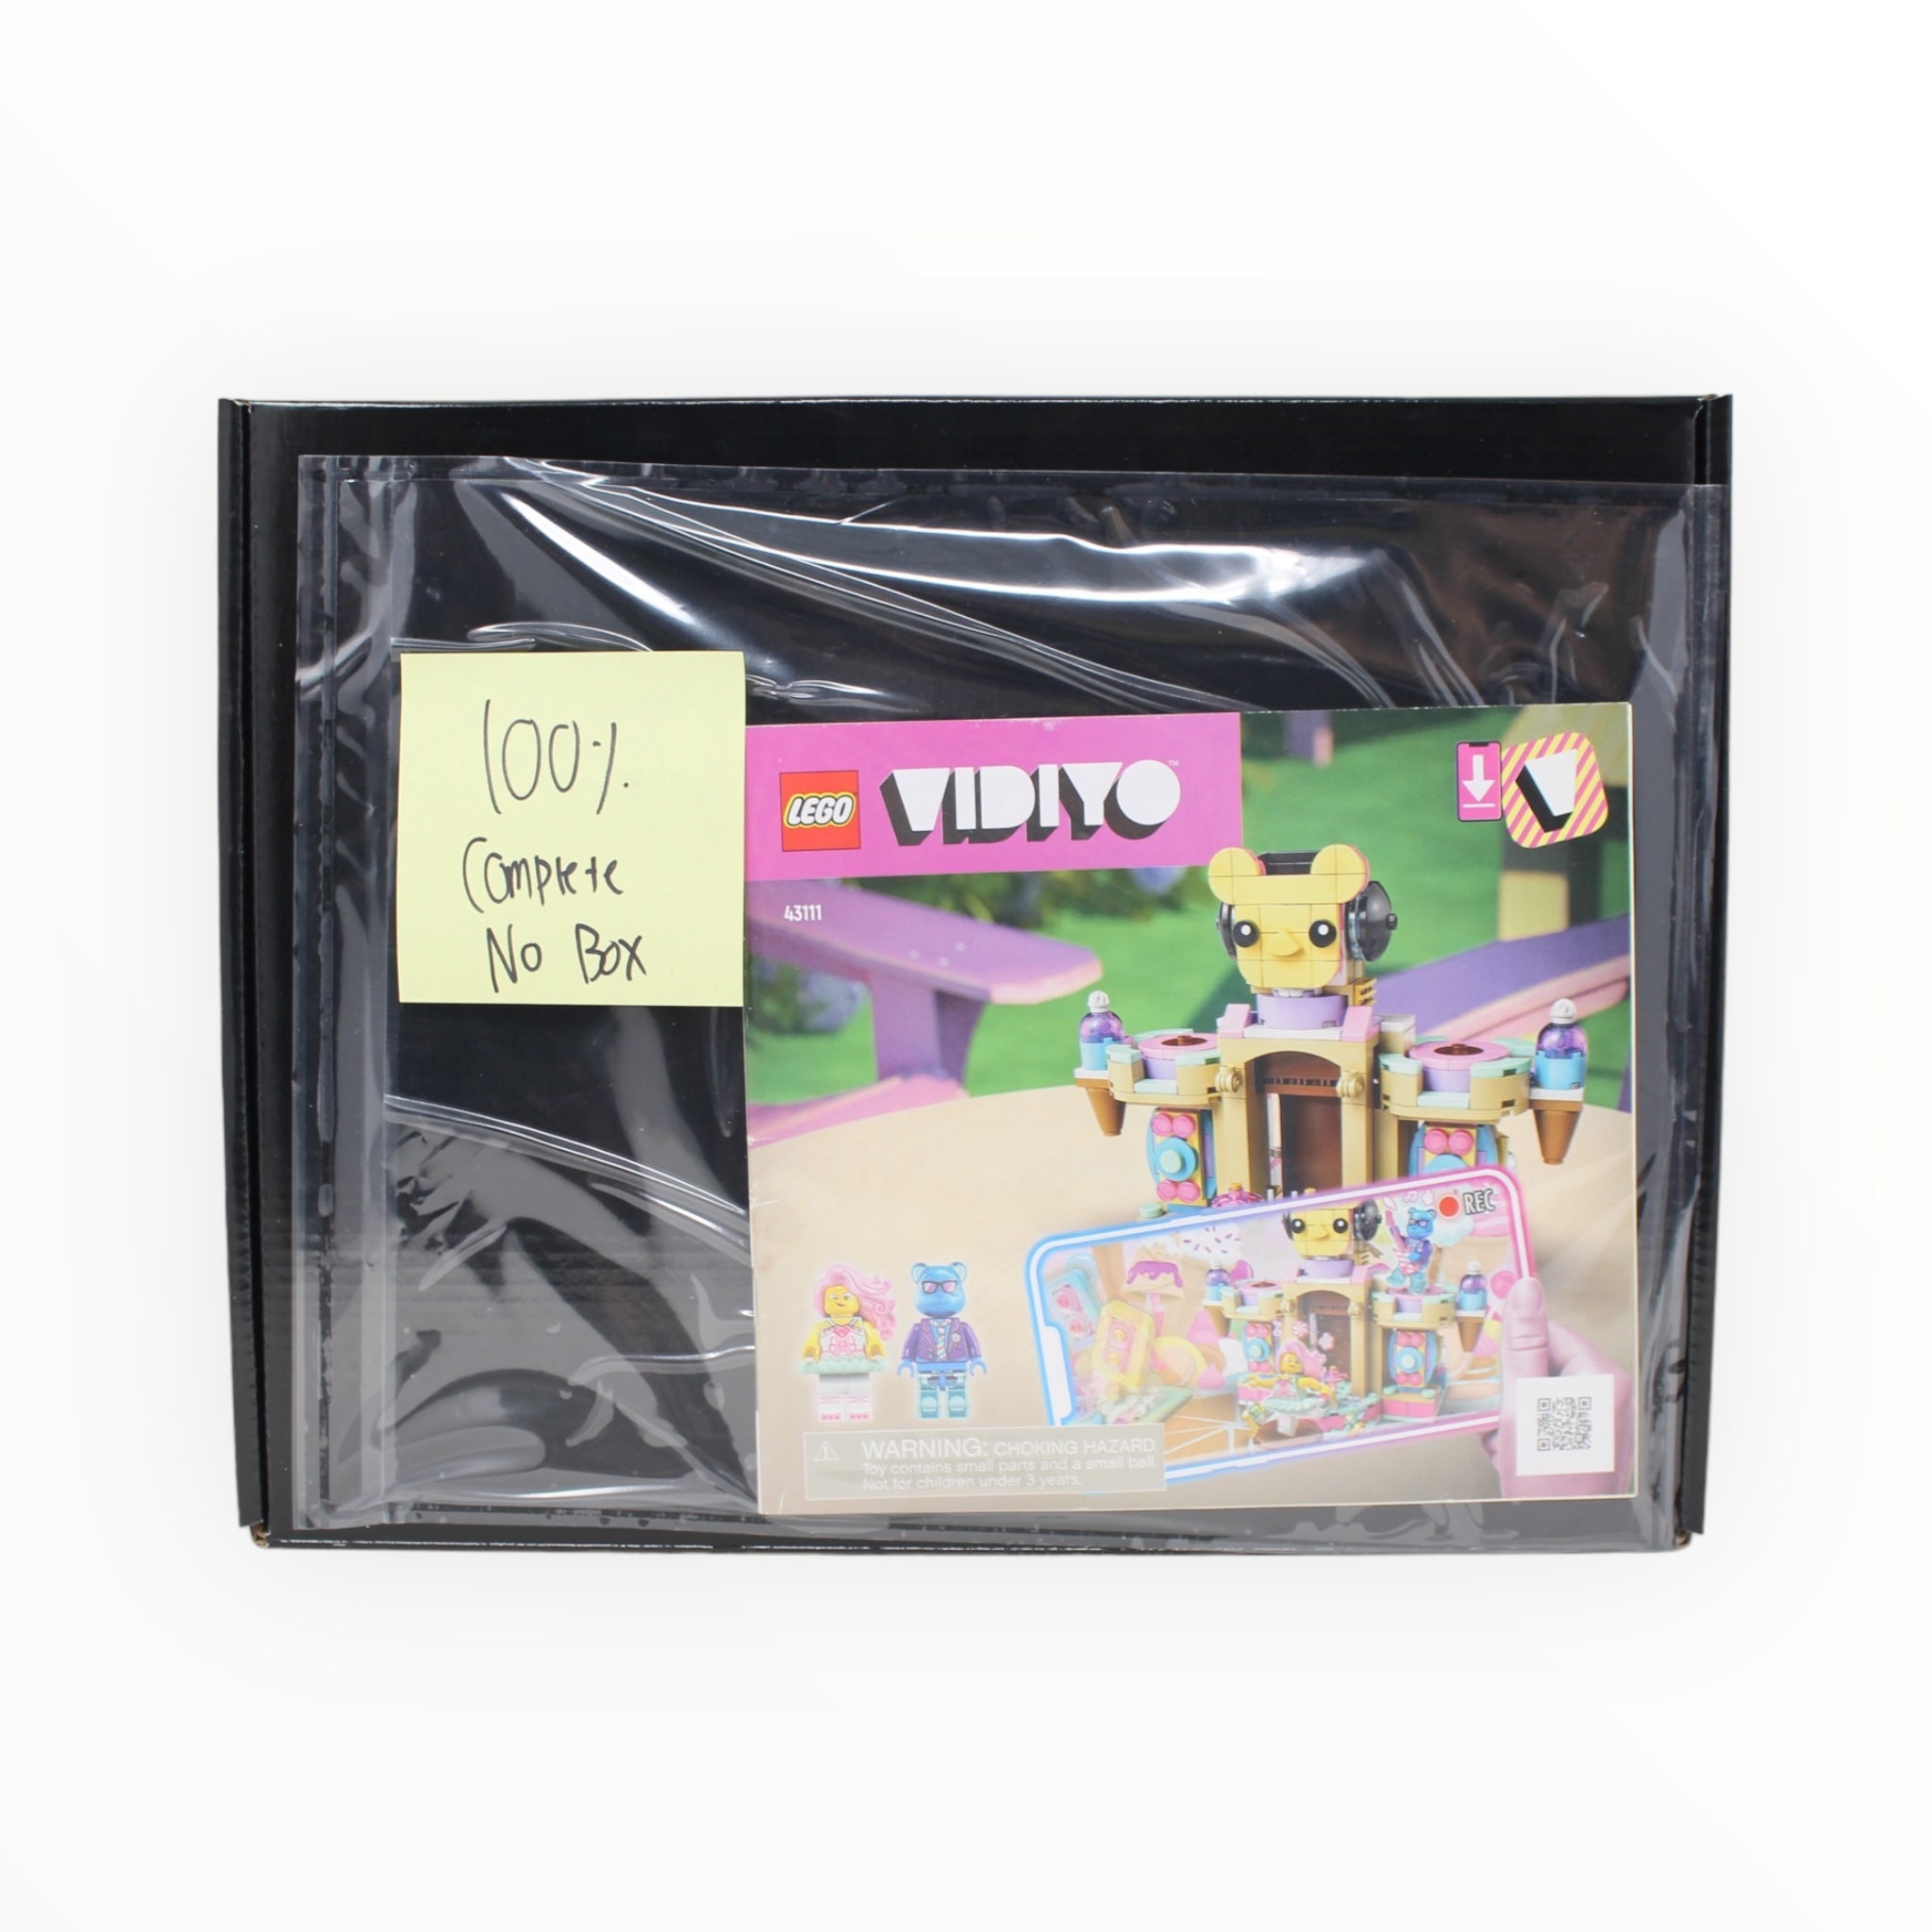 Certified Used Set 43111 VIDIYO Candy Castle Stage (no box)